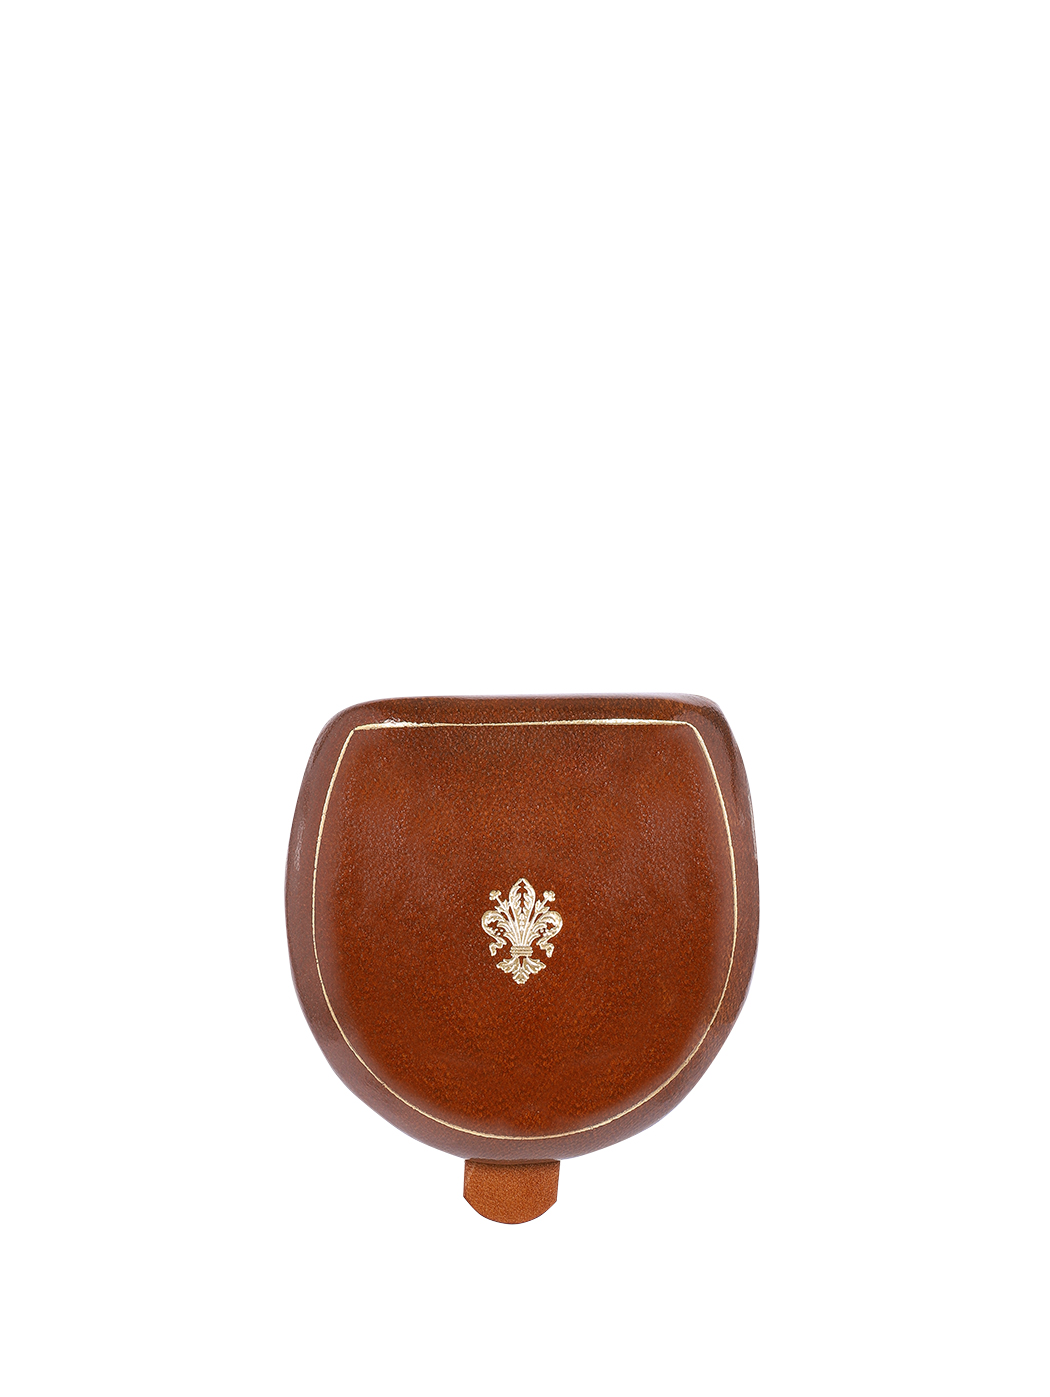 Florentine Lily Tacco Coin Holder Natural Tan